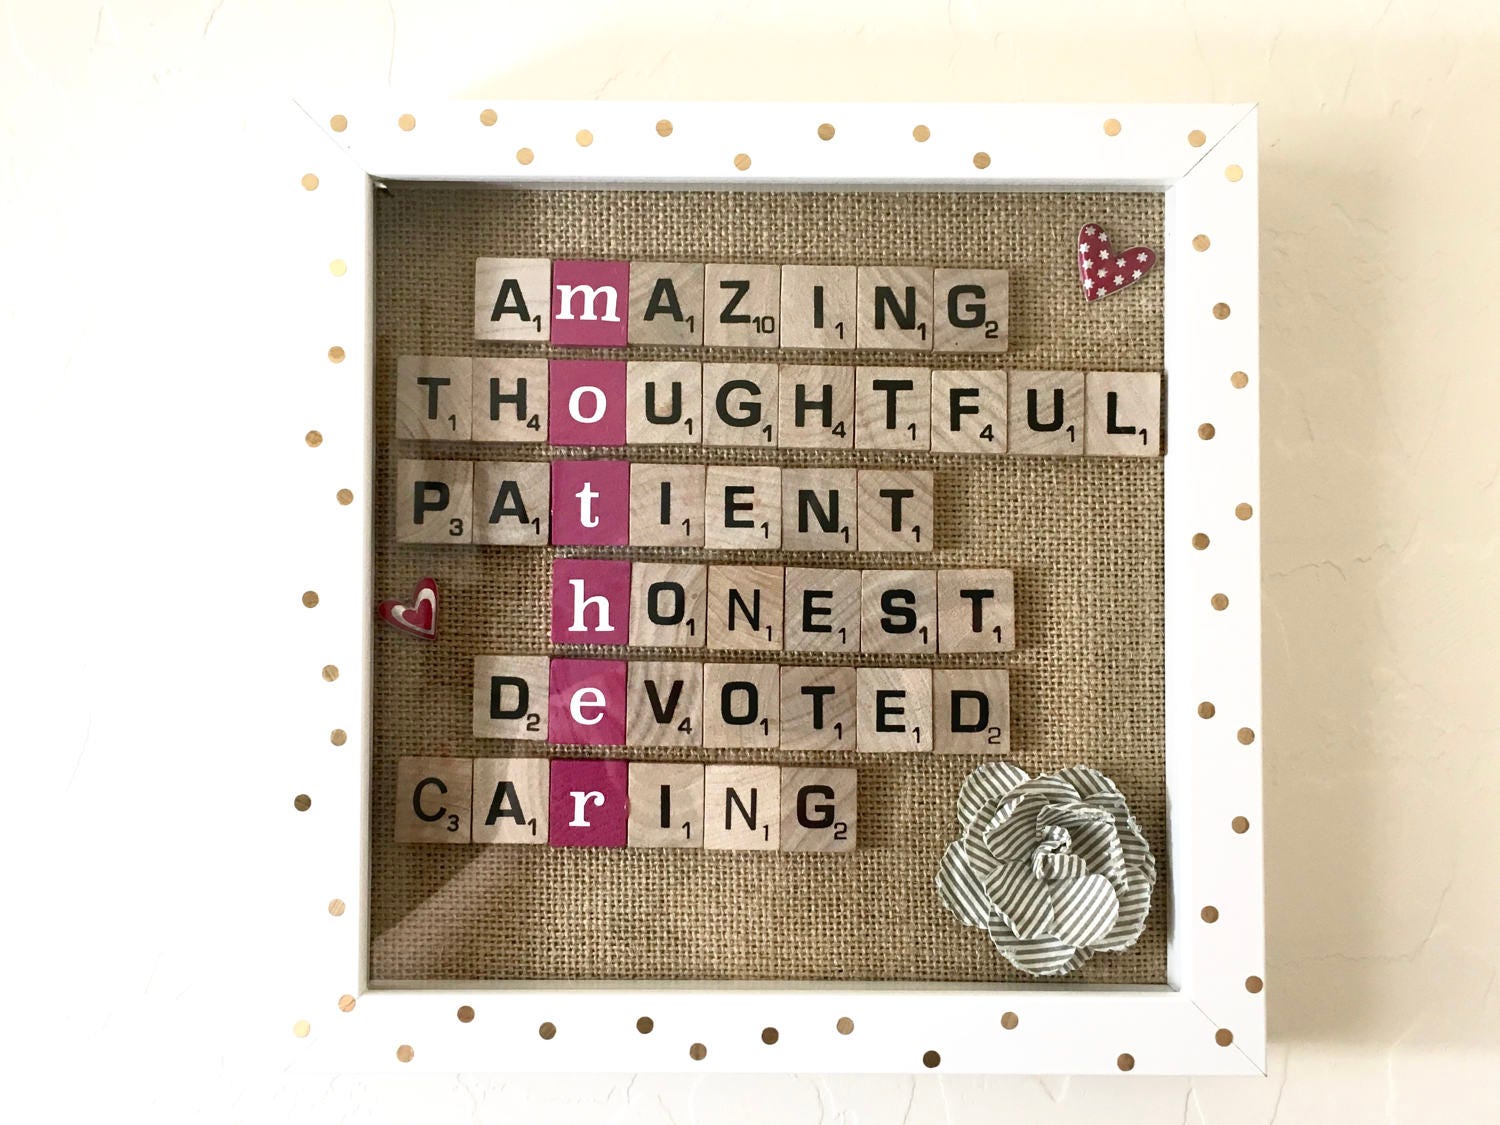 Download Mothers shadow box Mothers day shadow box scrabble